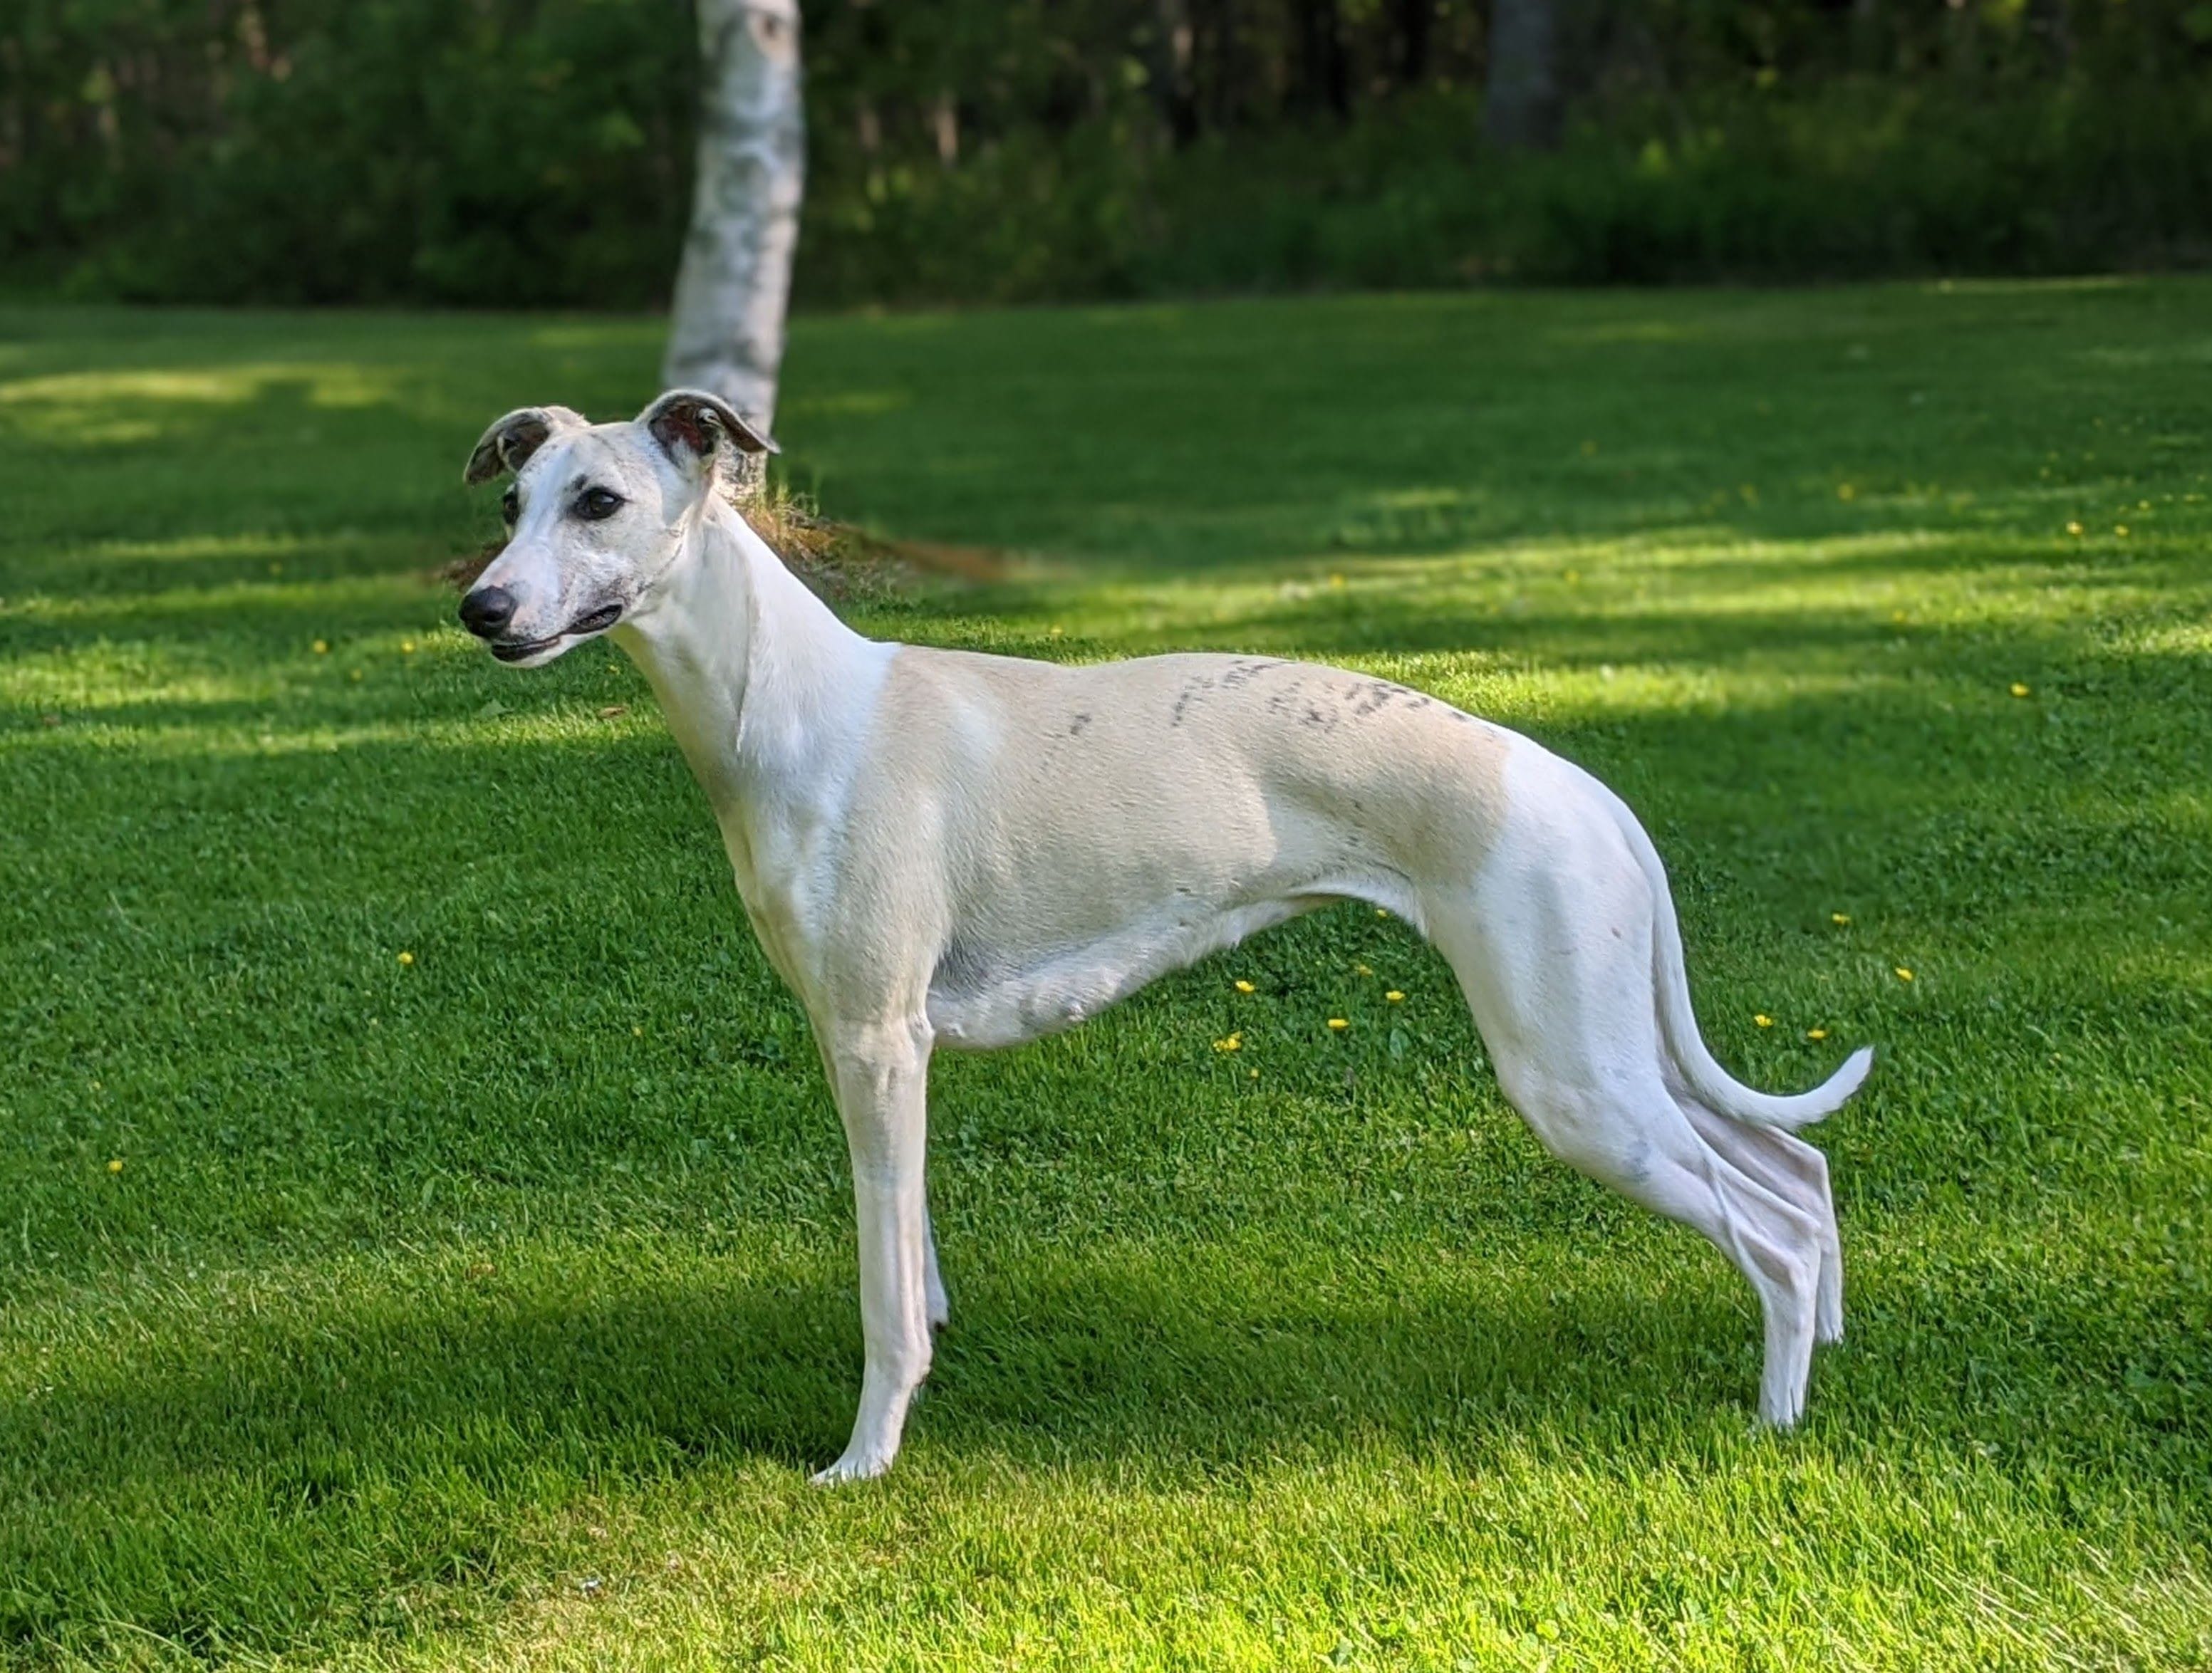 A whippet standing in a field